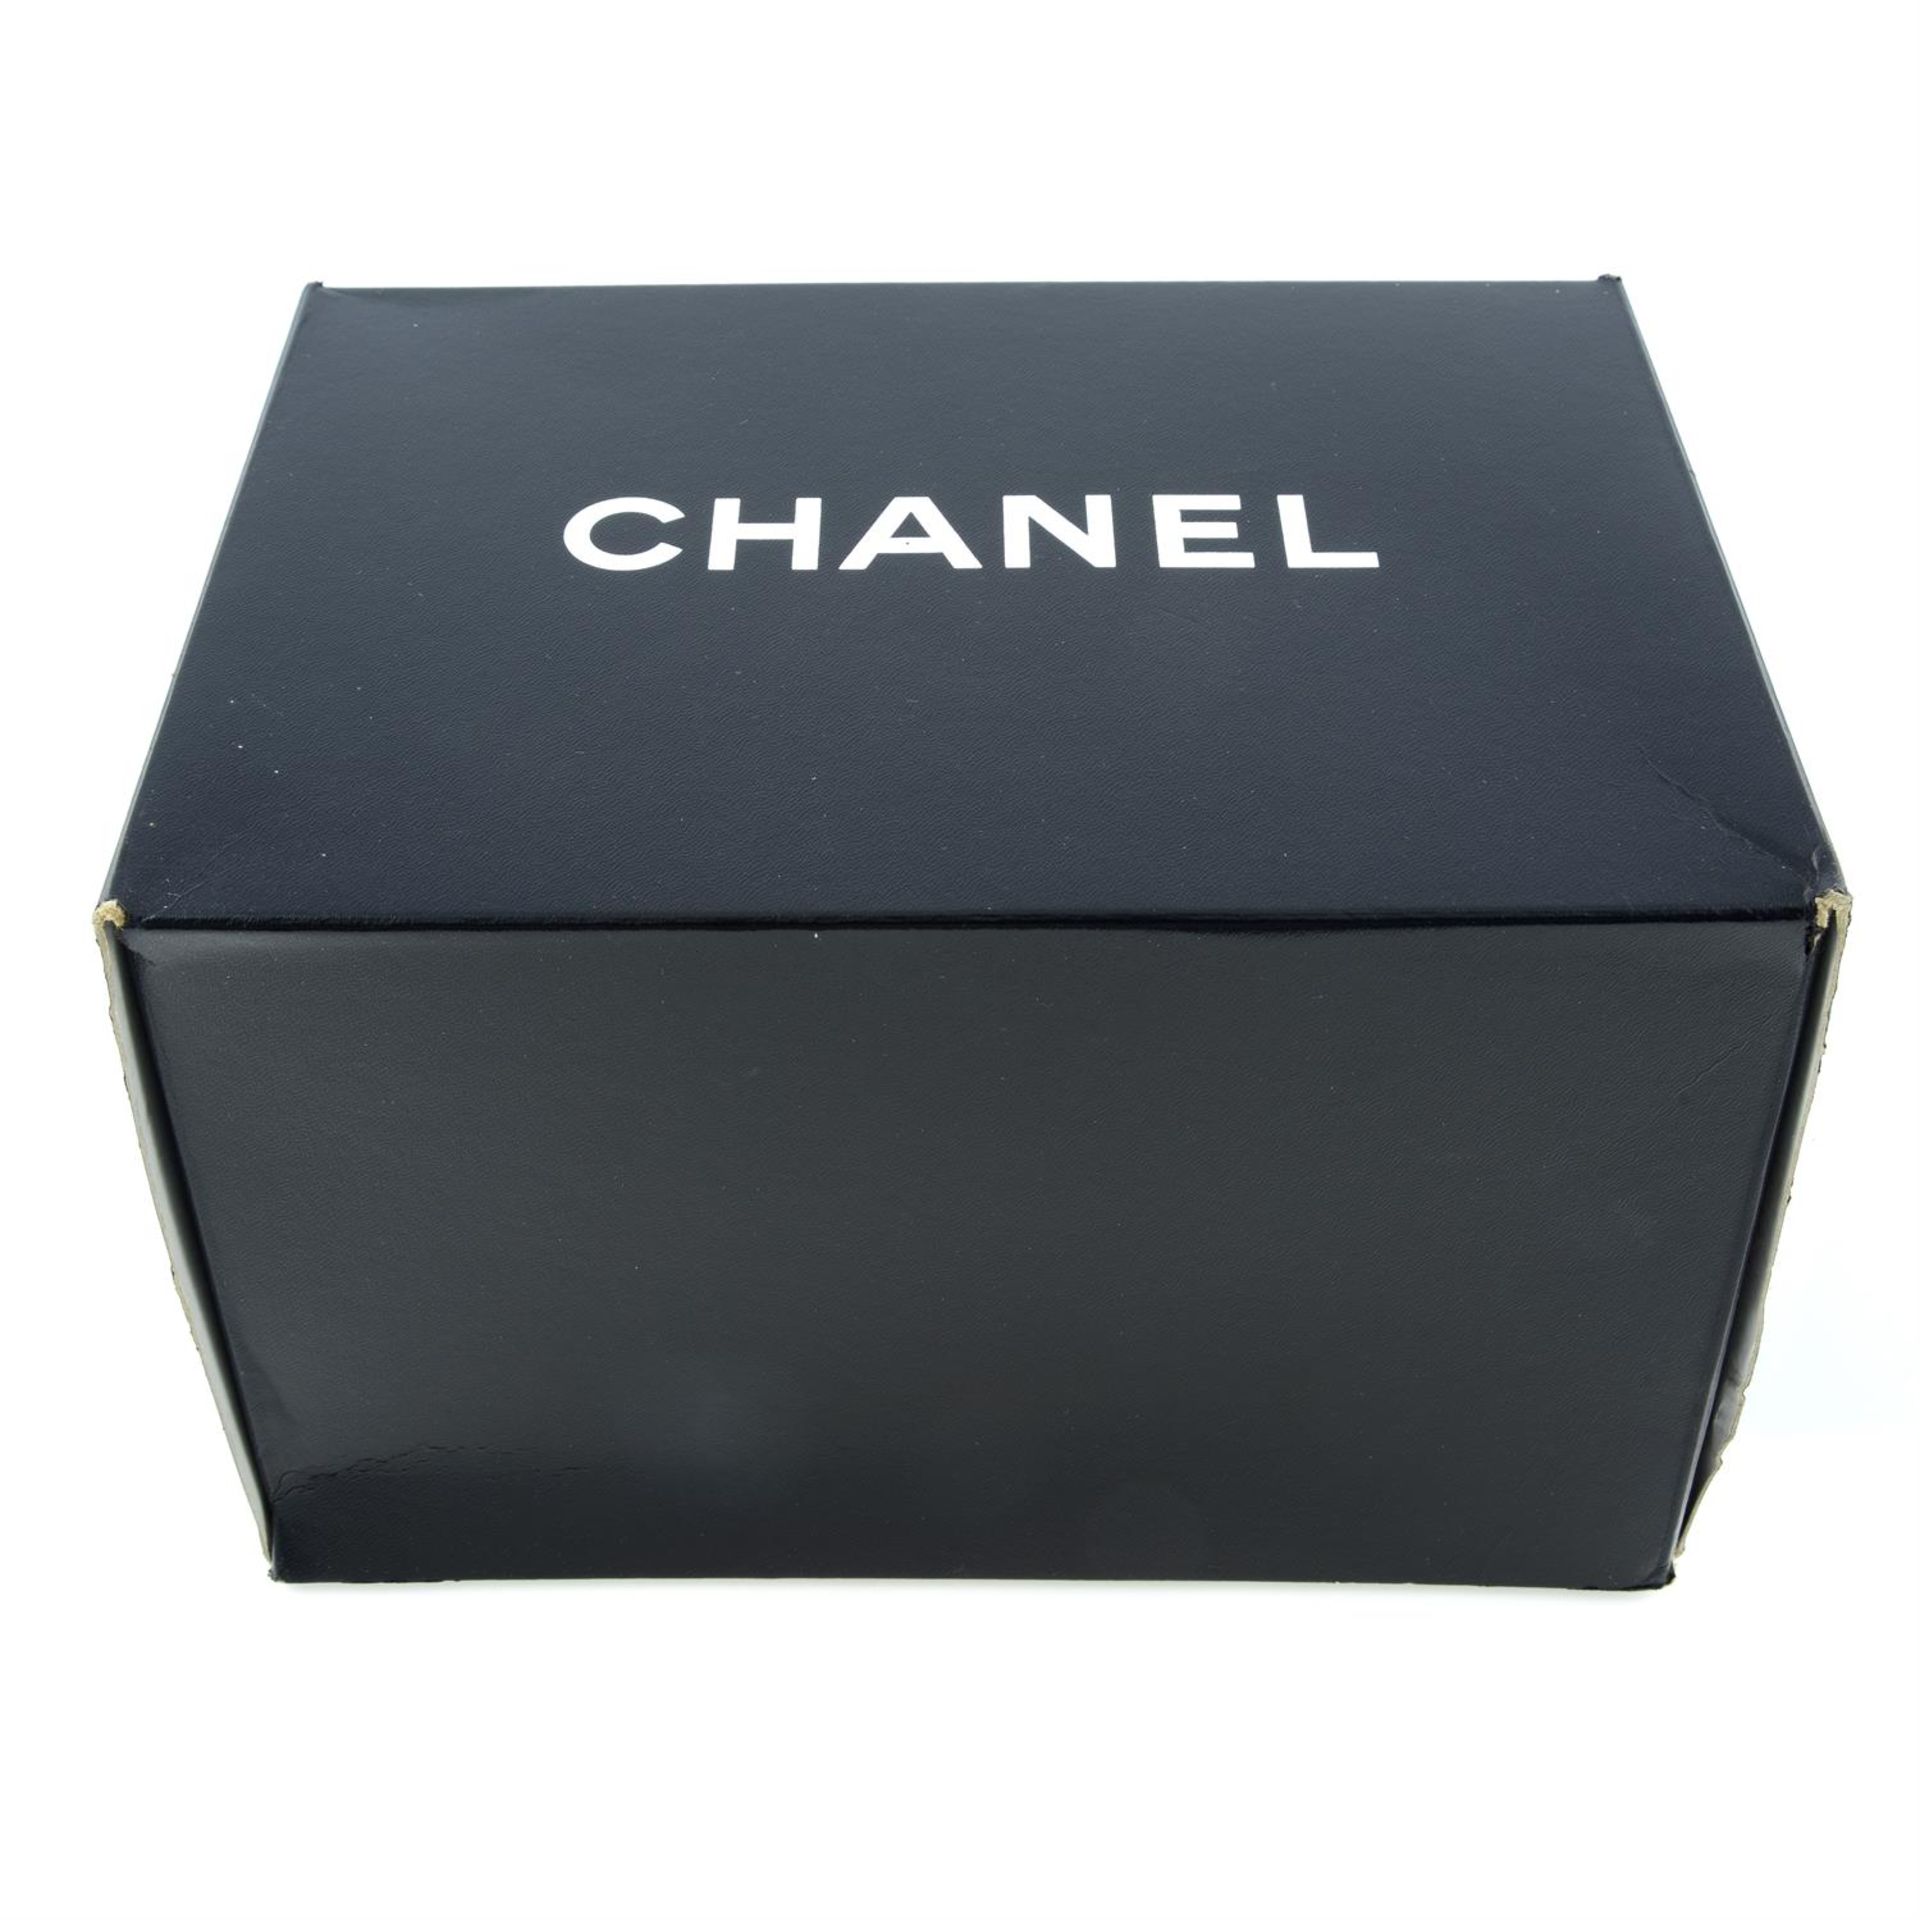 CHANEL - a 1996 Vanity case. - Image 4 of 4